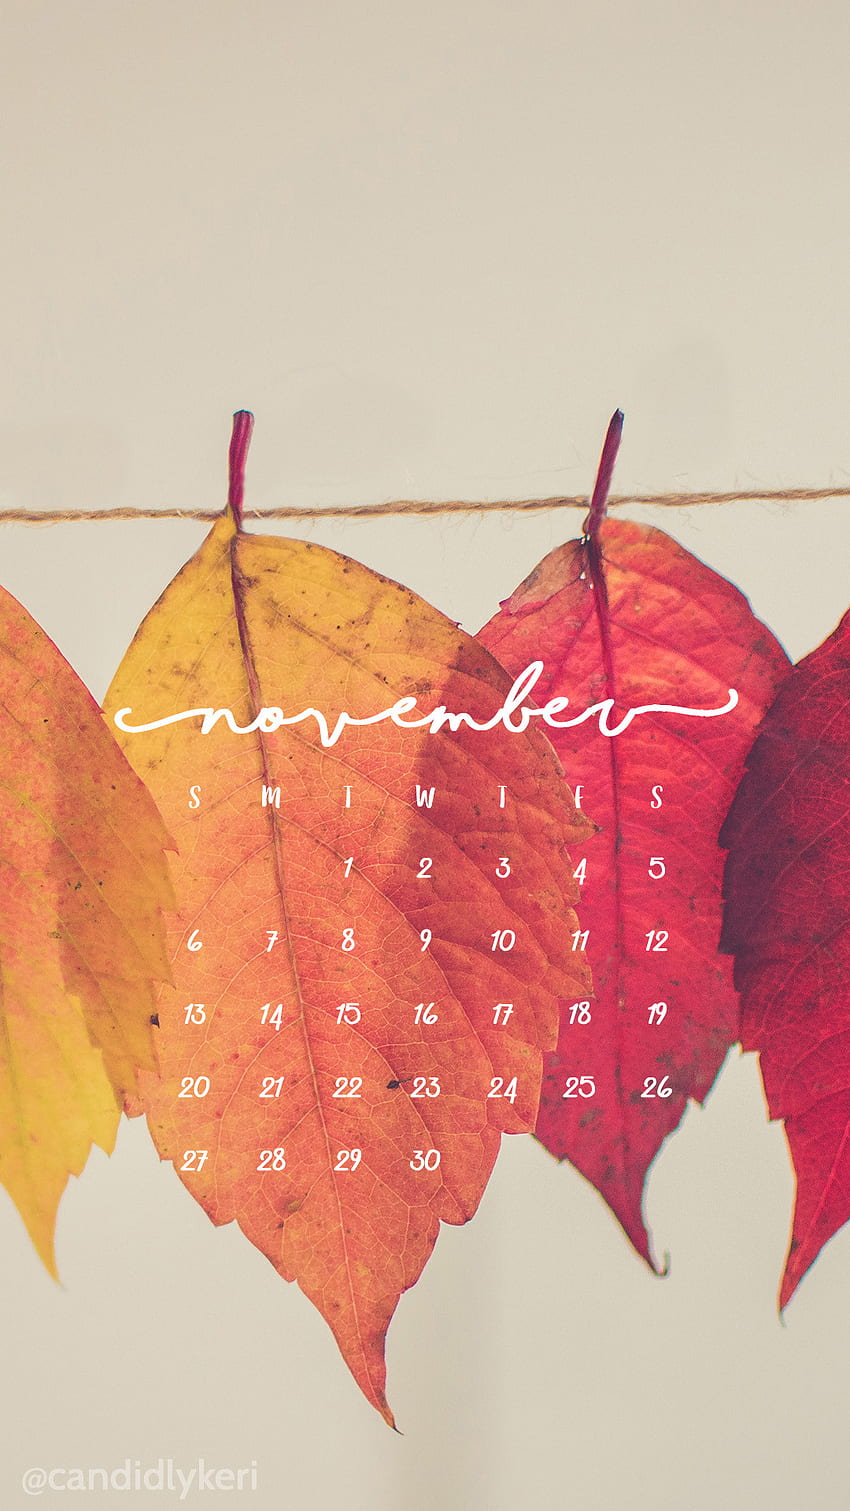 Pretty Leaf graphy colorful leaves yellow orange red November calendar 2016 you can for HD phone wallpaper